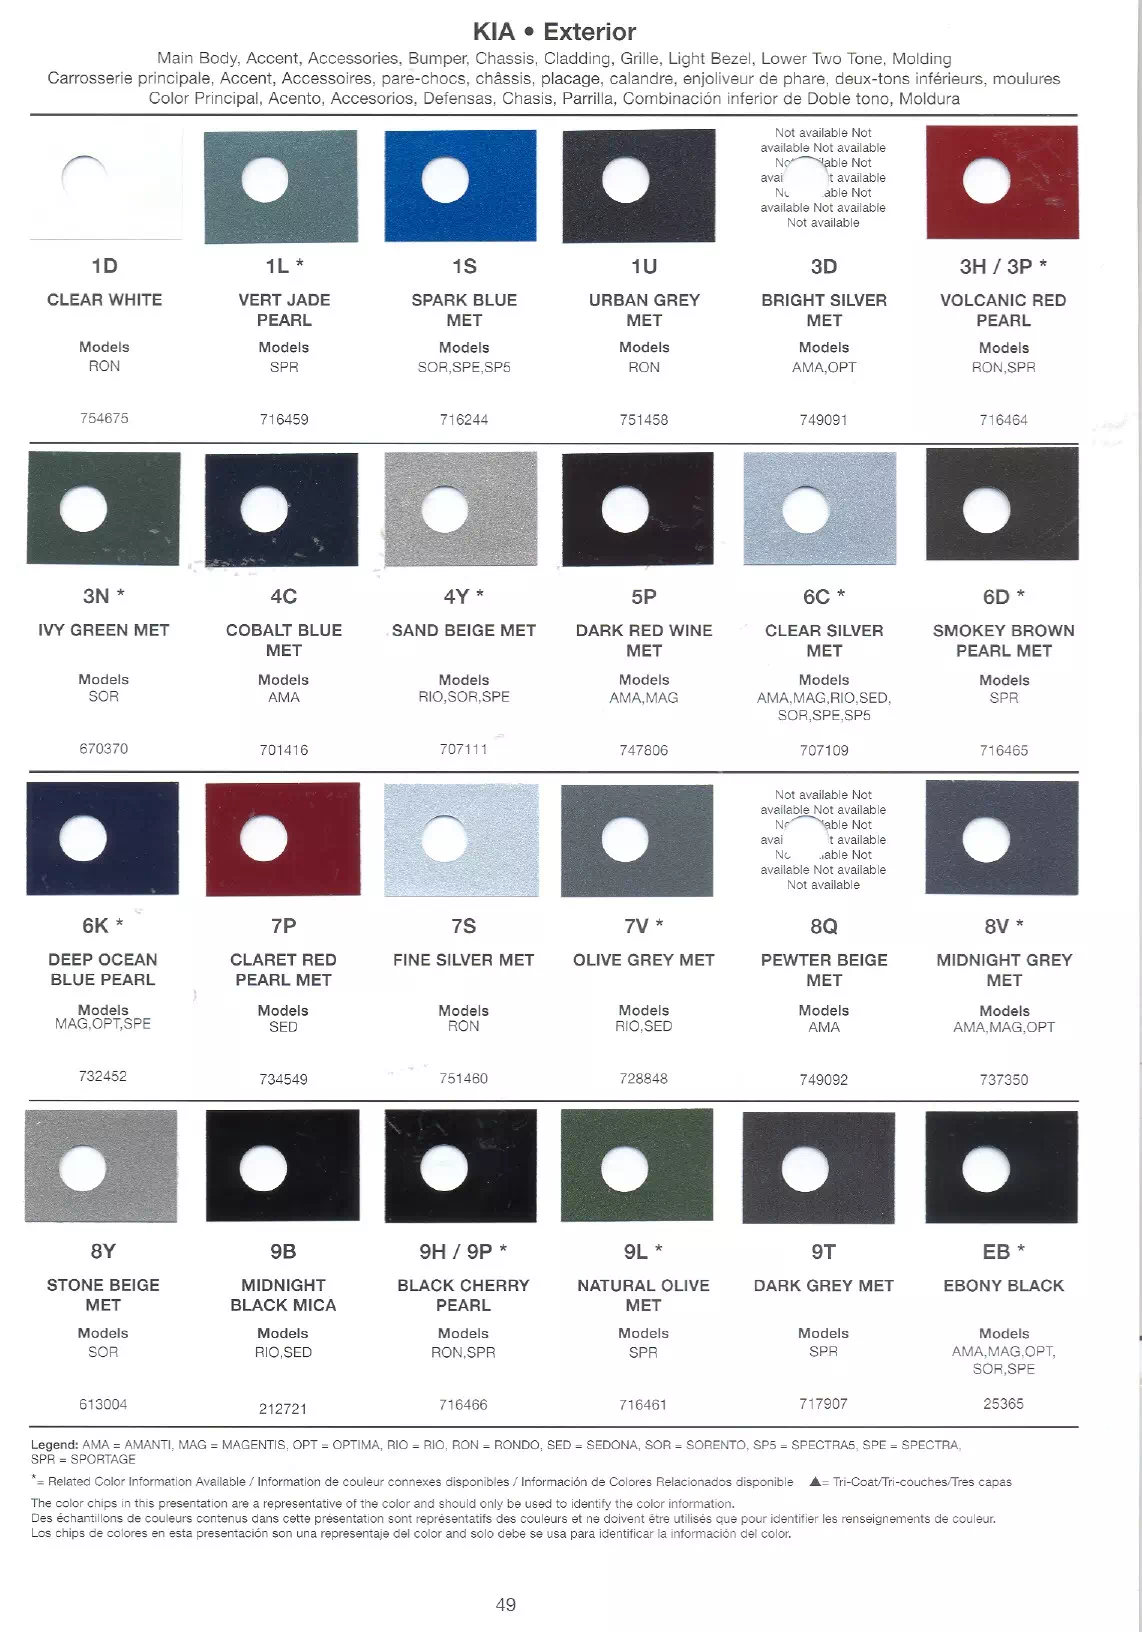 Exterior Paint Colors for Kia Vehicles in 2007